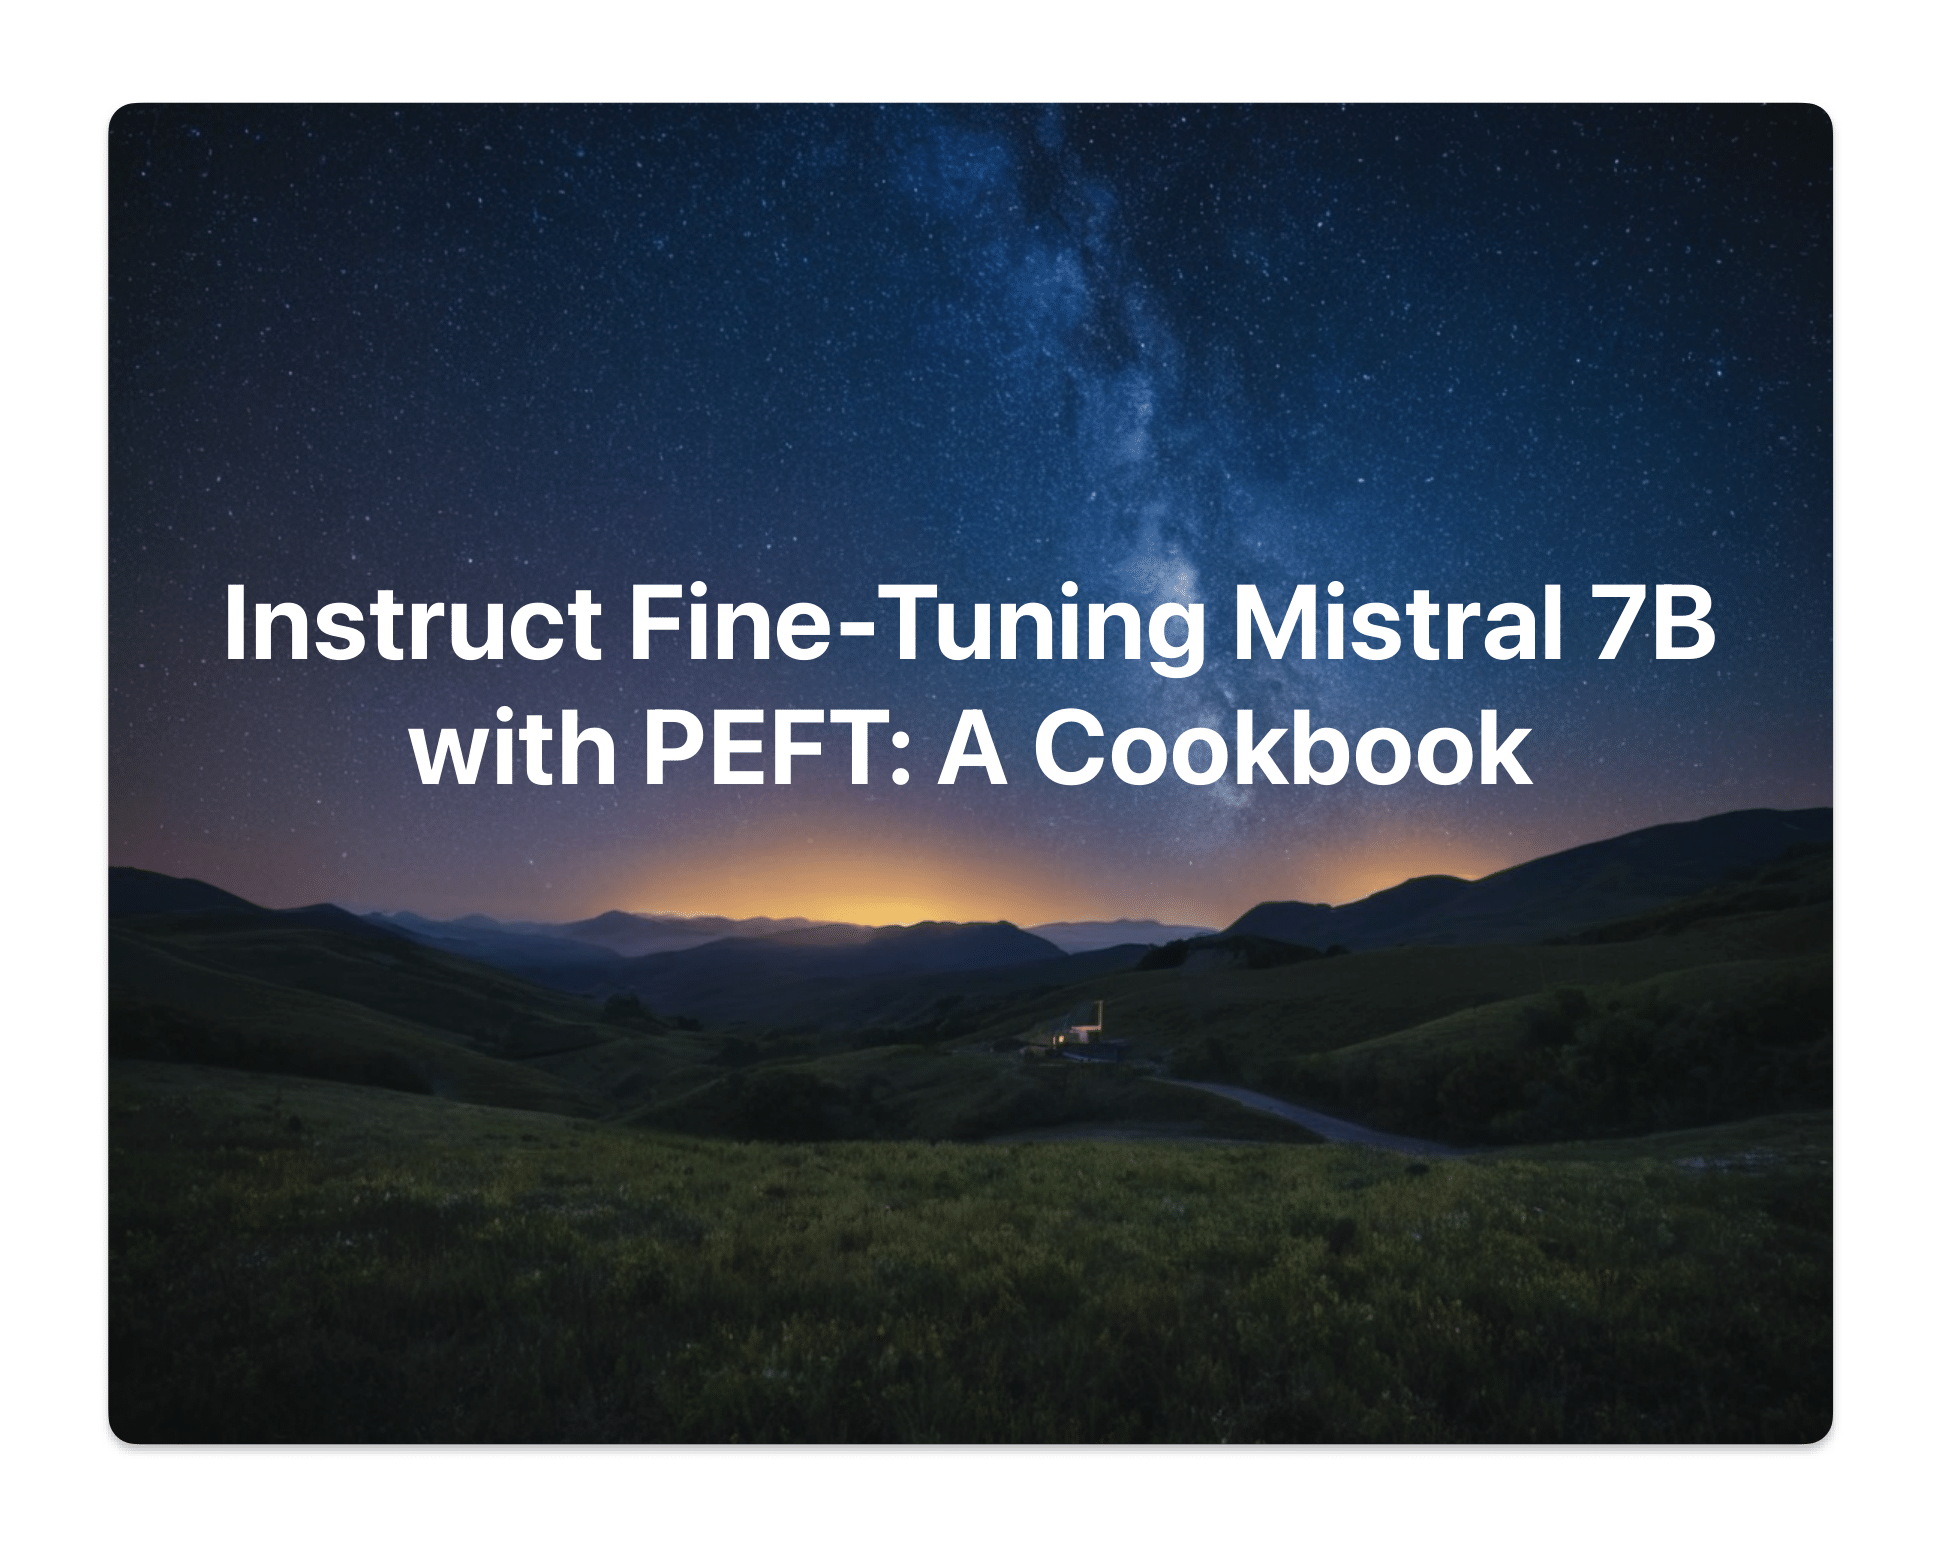 Instruct Fine-Tuning Mistral 7B with PEFT: A Cookbook